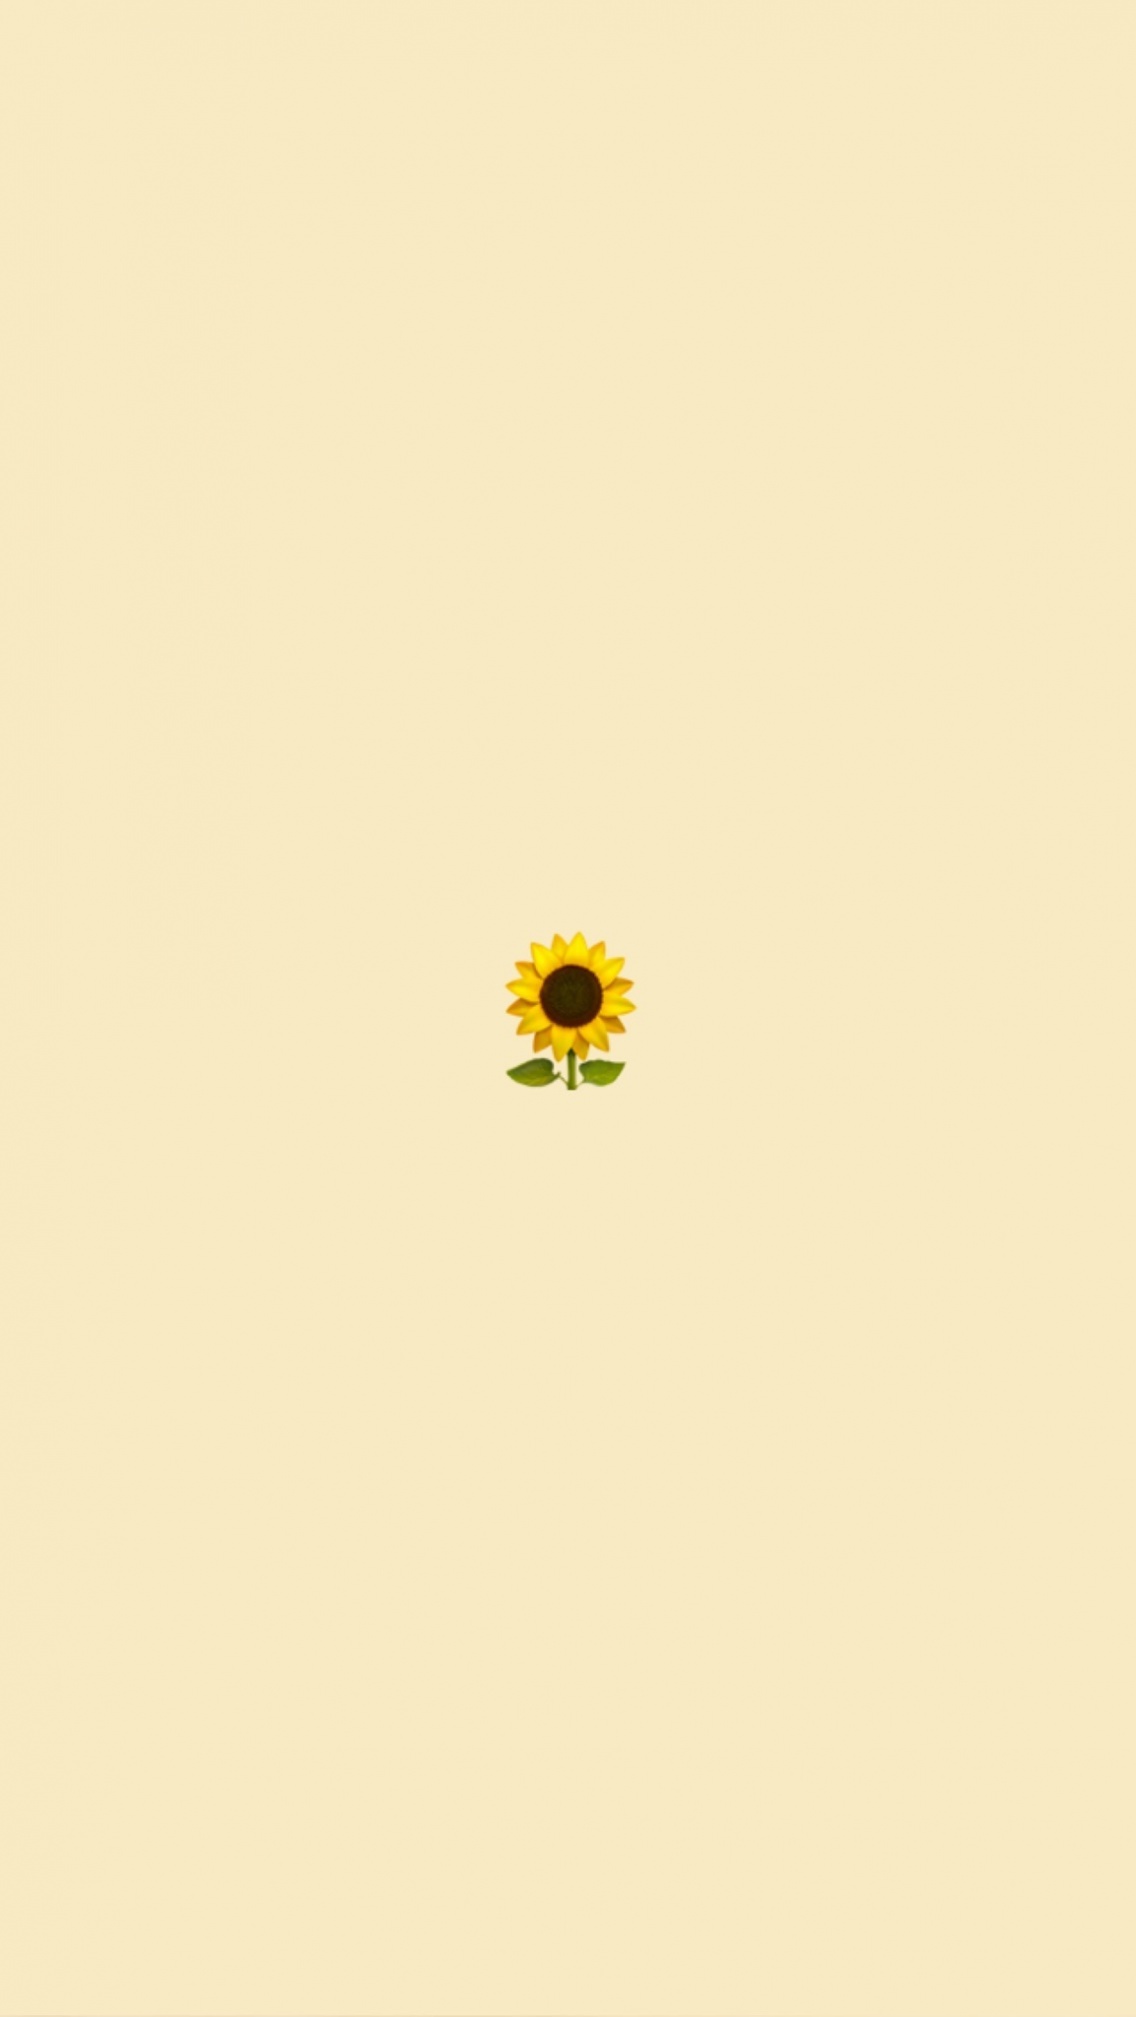 A sunflower is in the middle of an empty room - VSCO